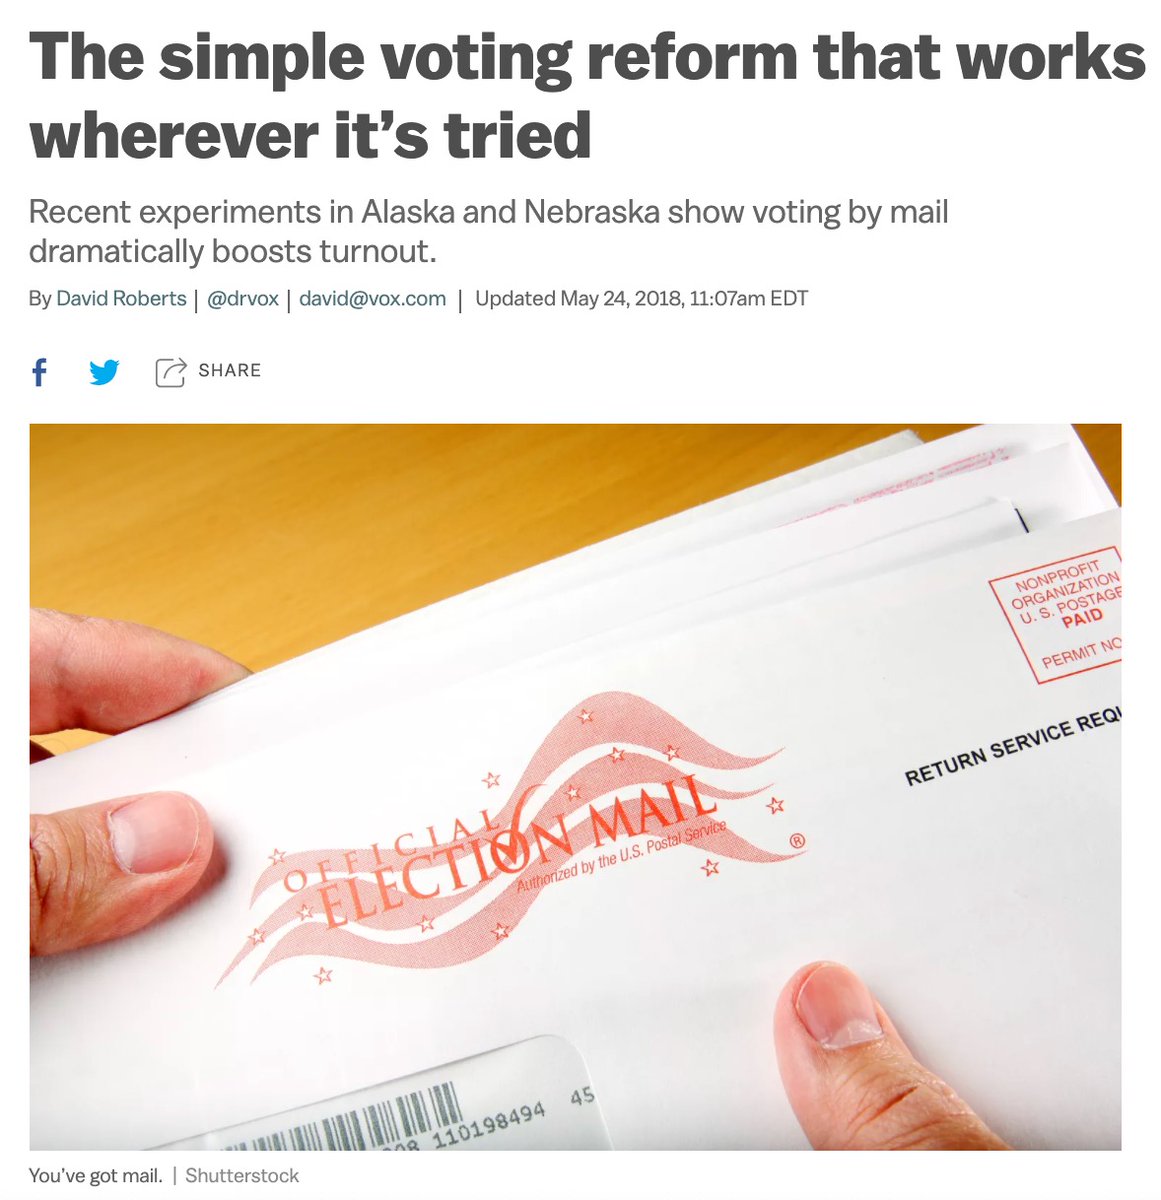 21/"Oregon has mailed out more than 100 million ballots since 2000, with about a dozen cases of proven fraud; a 0.000012 percent rate" ( @drvox for  @voxdotcom): https://www.vox.com/policy-and-politics/2018/5/23/17383400/vote-by-mail-home-california-alaska-nebraska